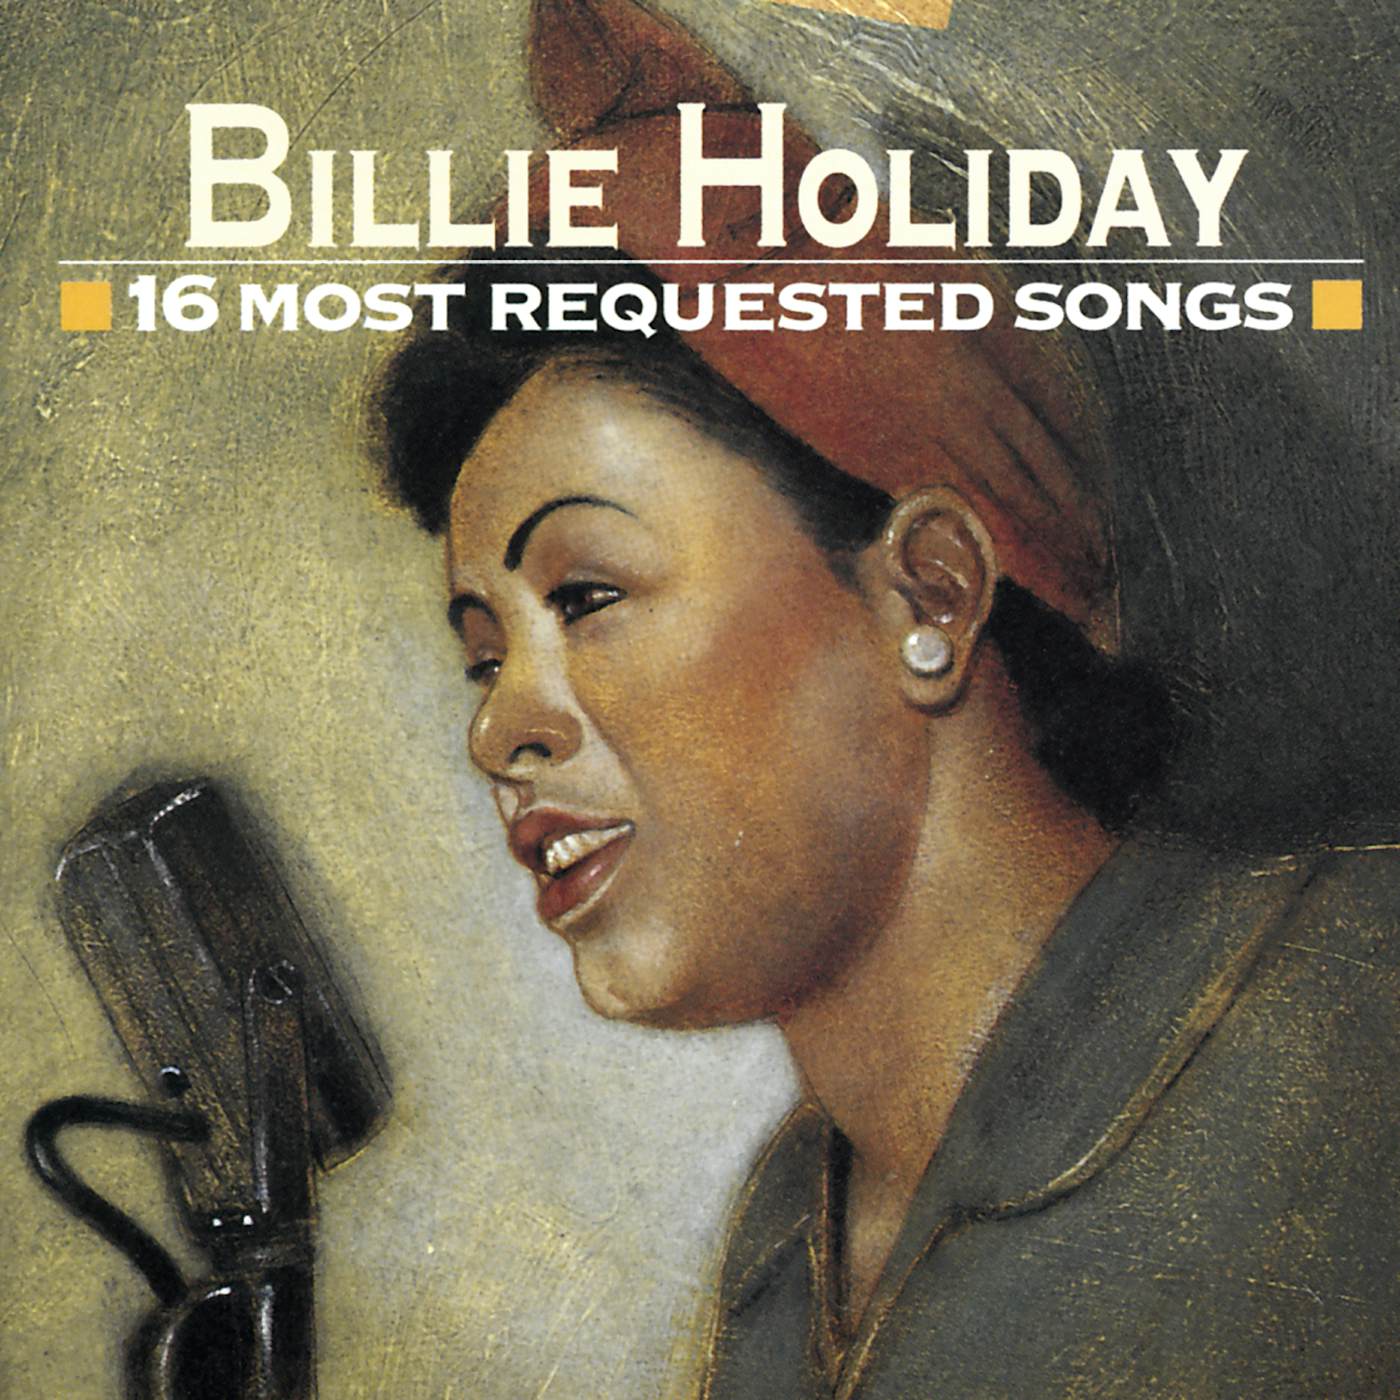 Billie Holiday 16 MOST REQUESTED SONGS CD